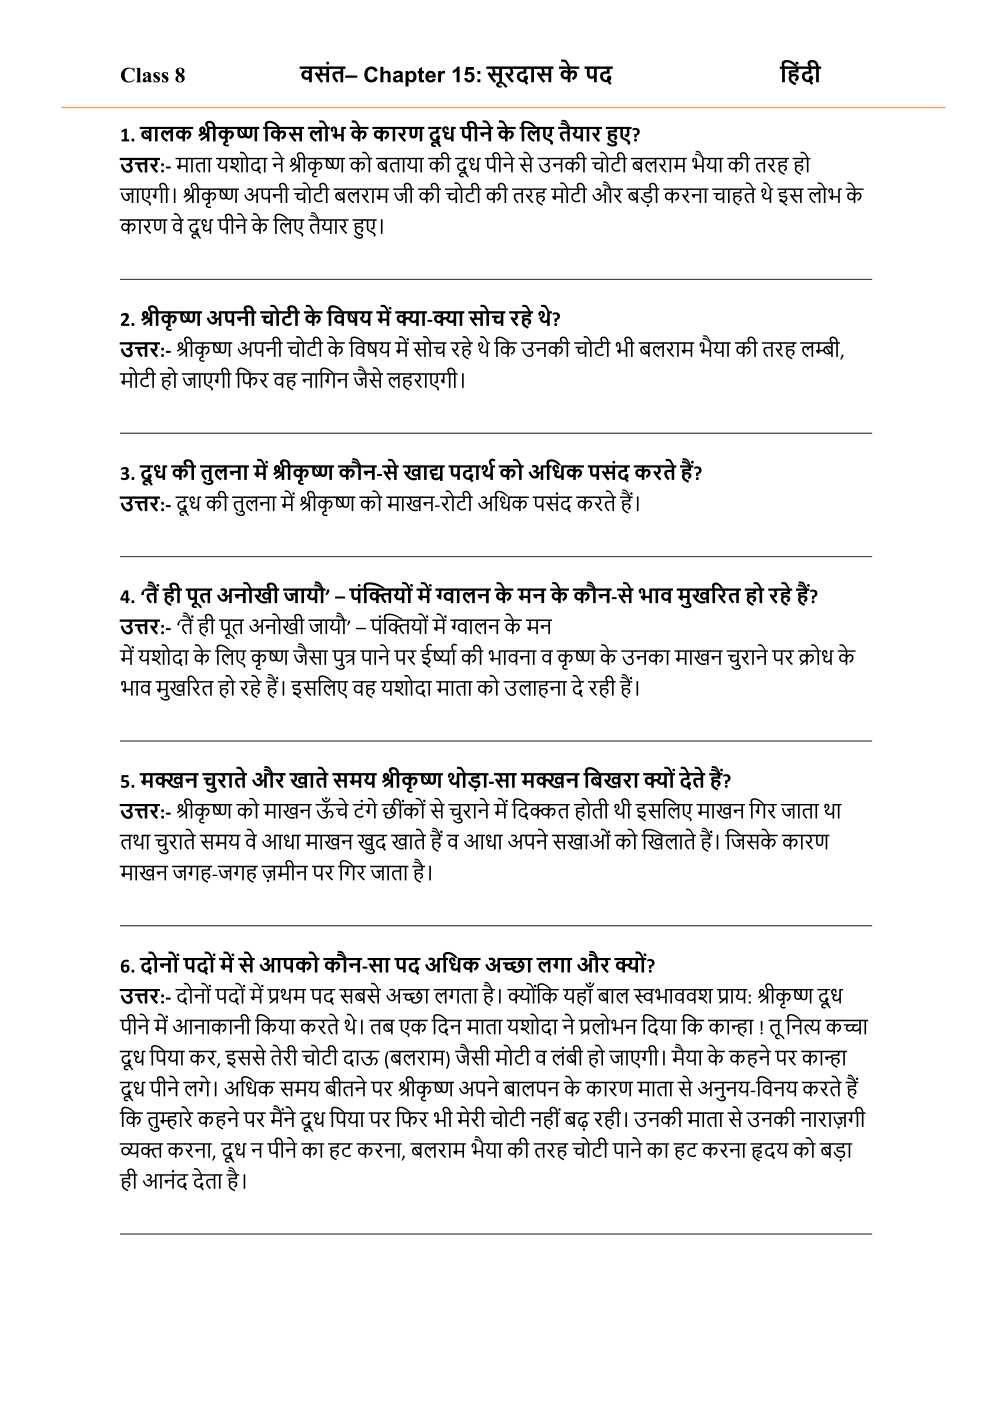 NCERT Solutions For Class 8 Hindi Vasant Chapter 15